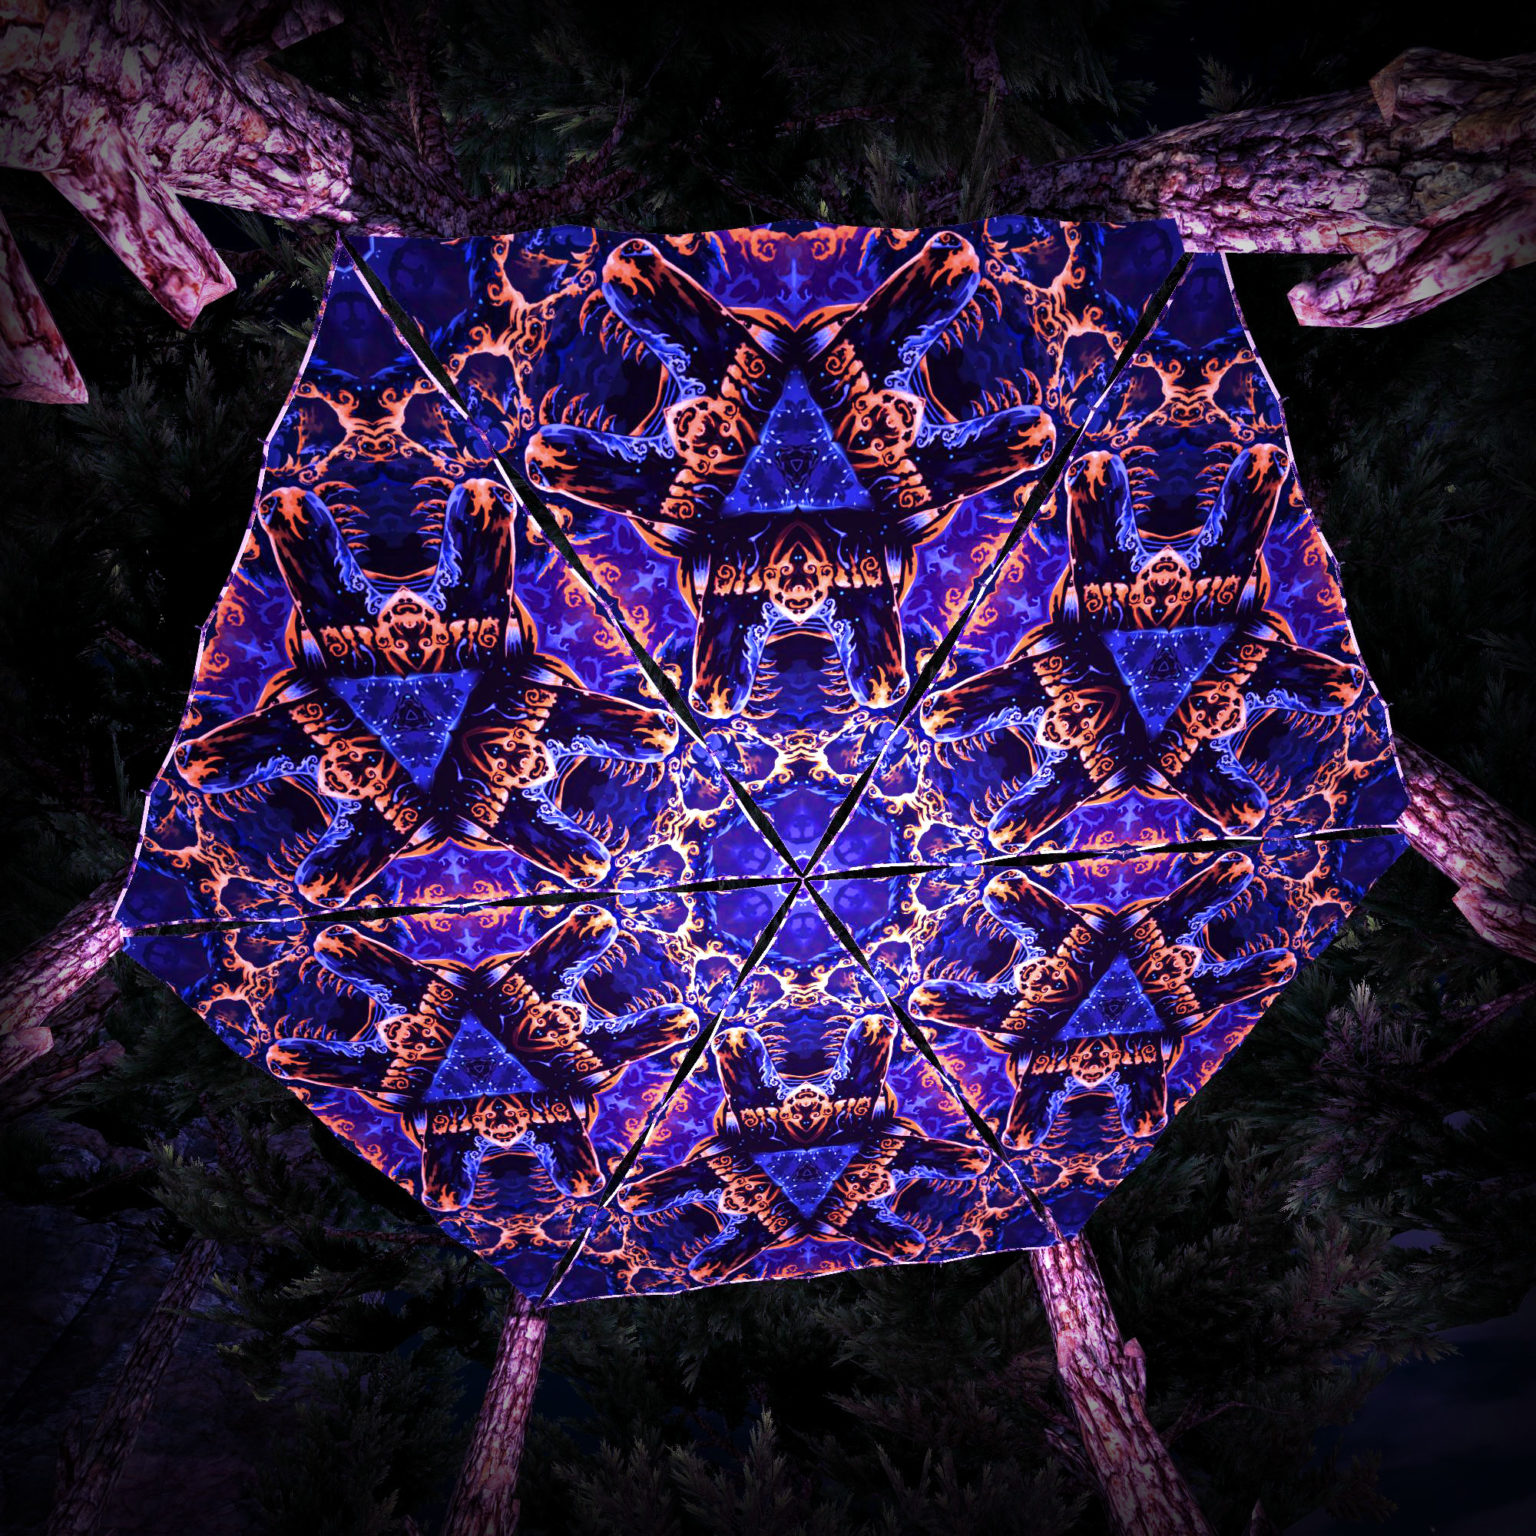 Magic Mushroom Werewolves UV-Triangles - TR03 - 6 Pieces - UV-Reactive Psychedelic Party Decoration - 3D Preview